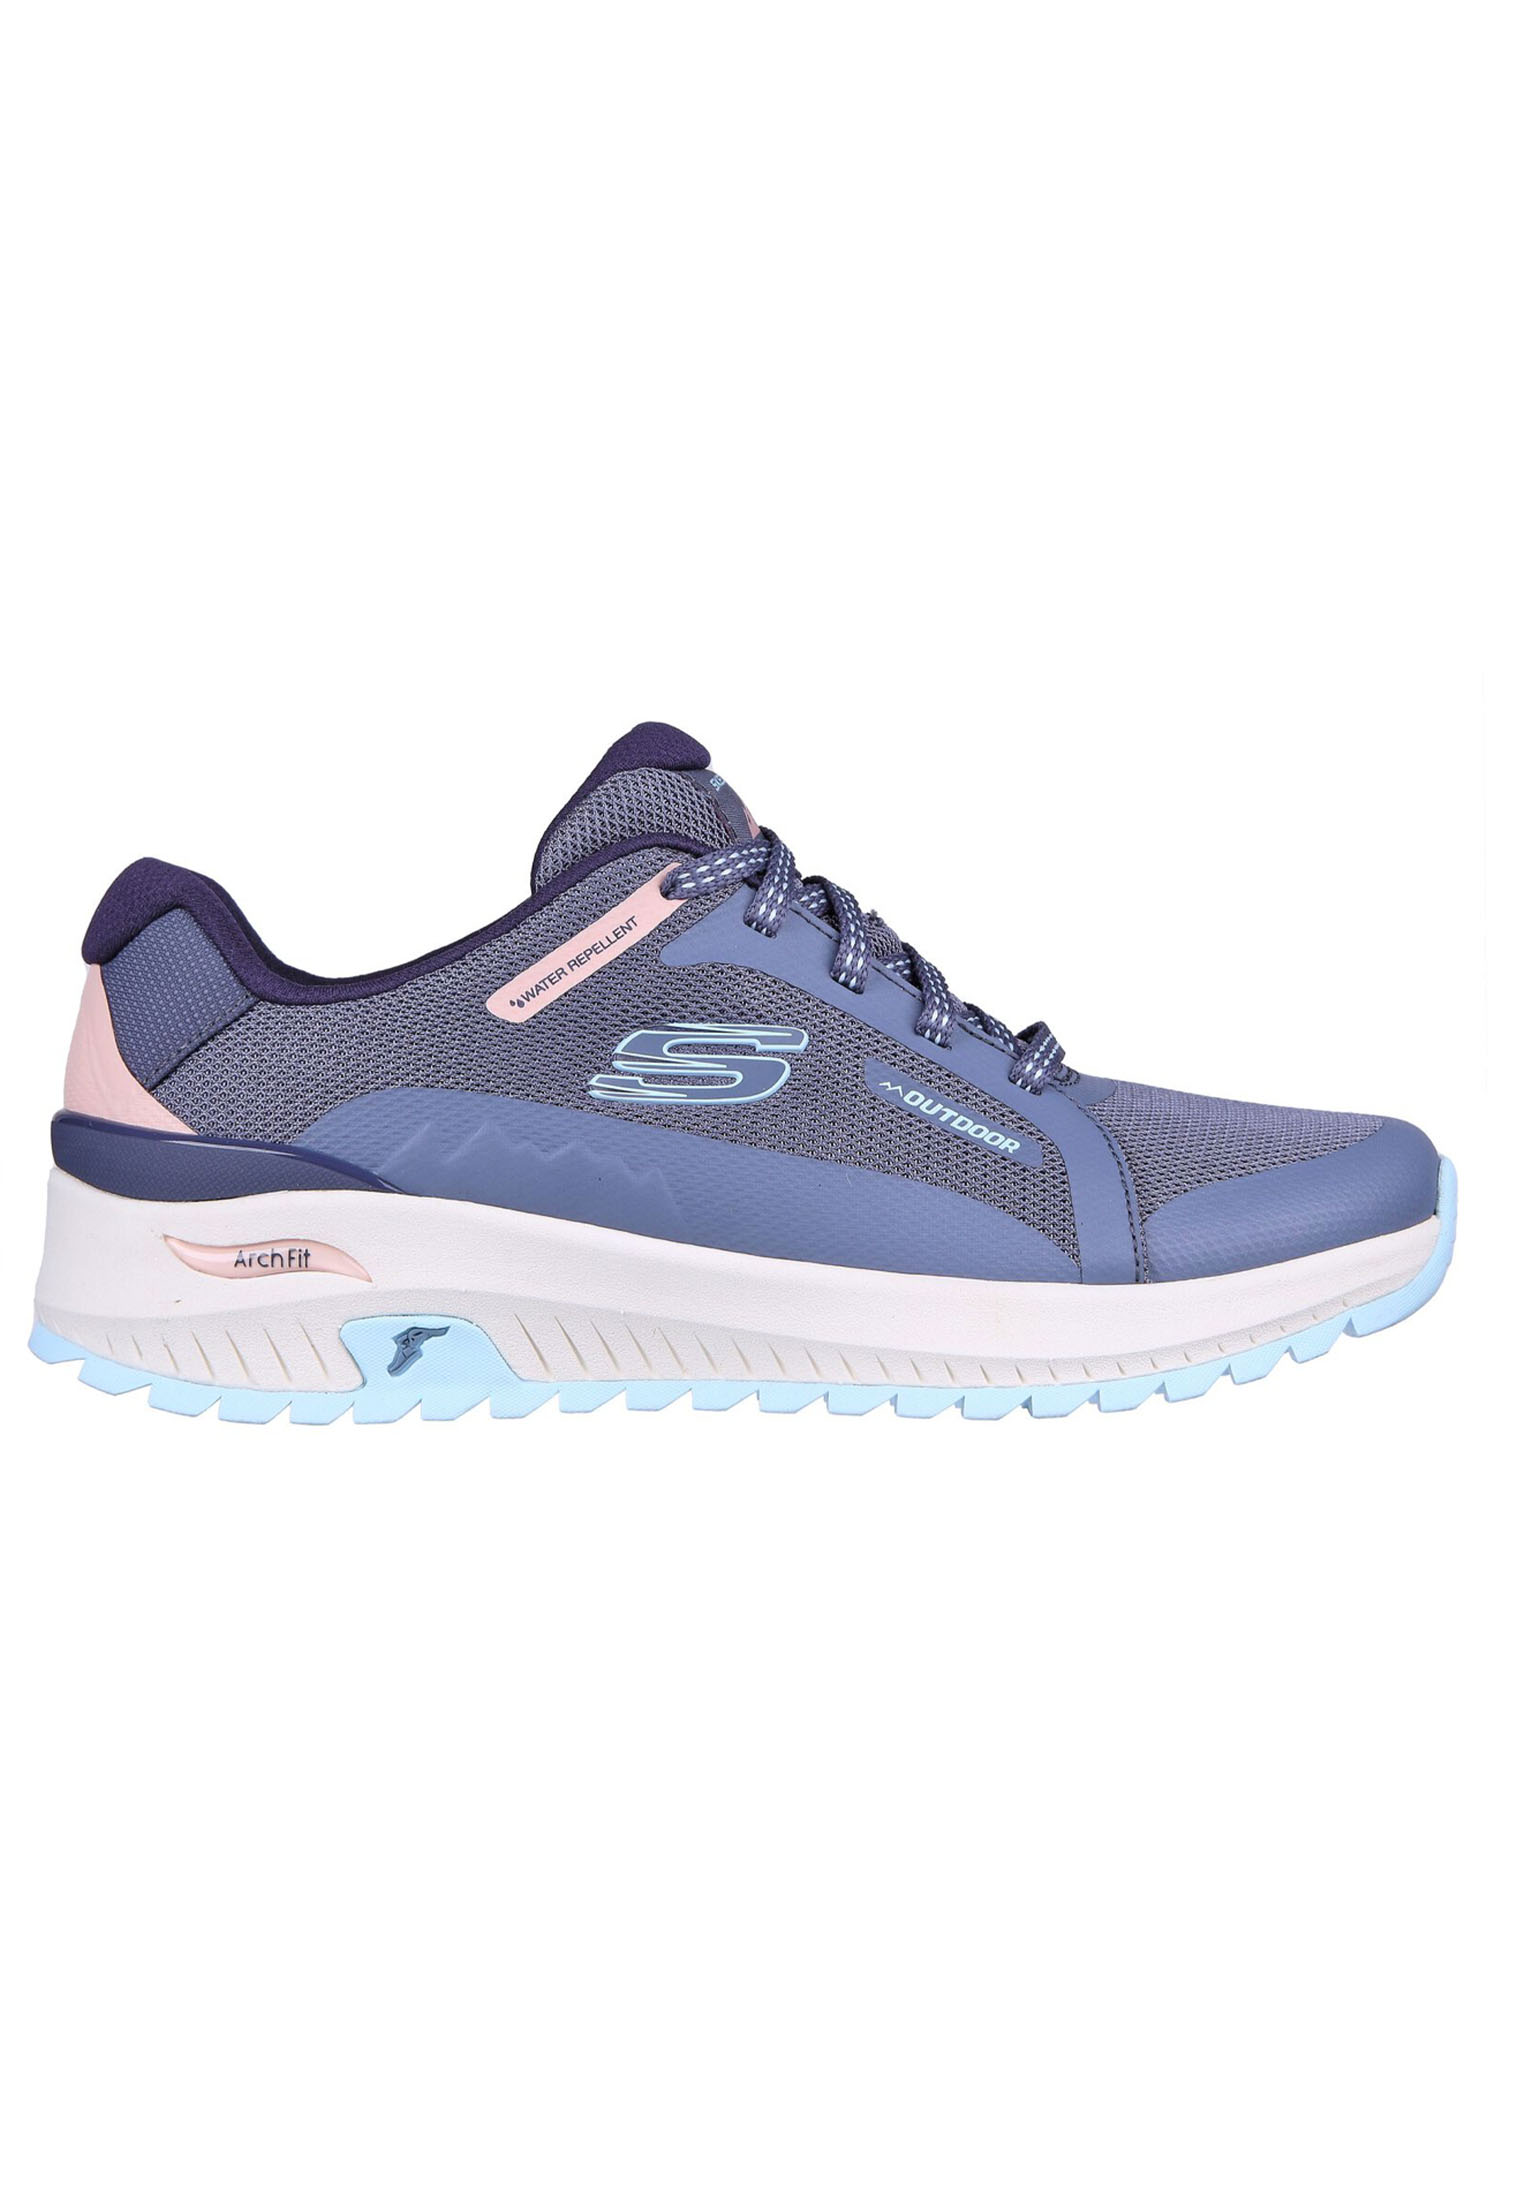 Skechers ARCH FIT DISCOVER dames sneakers - Blauw - Maat 40